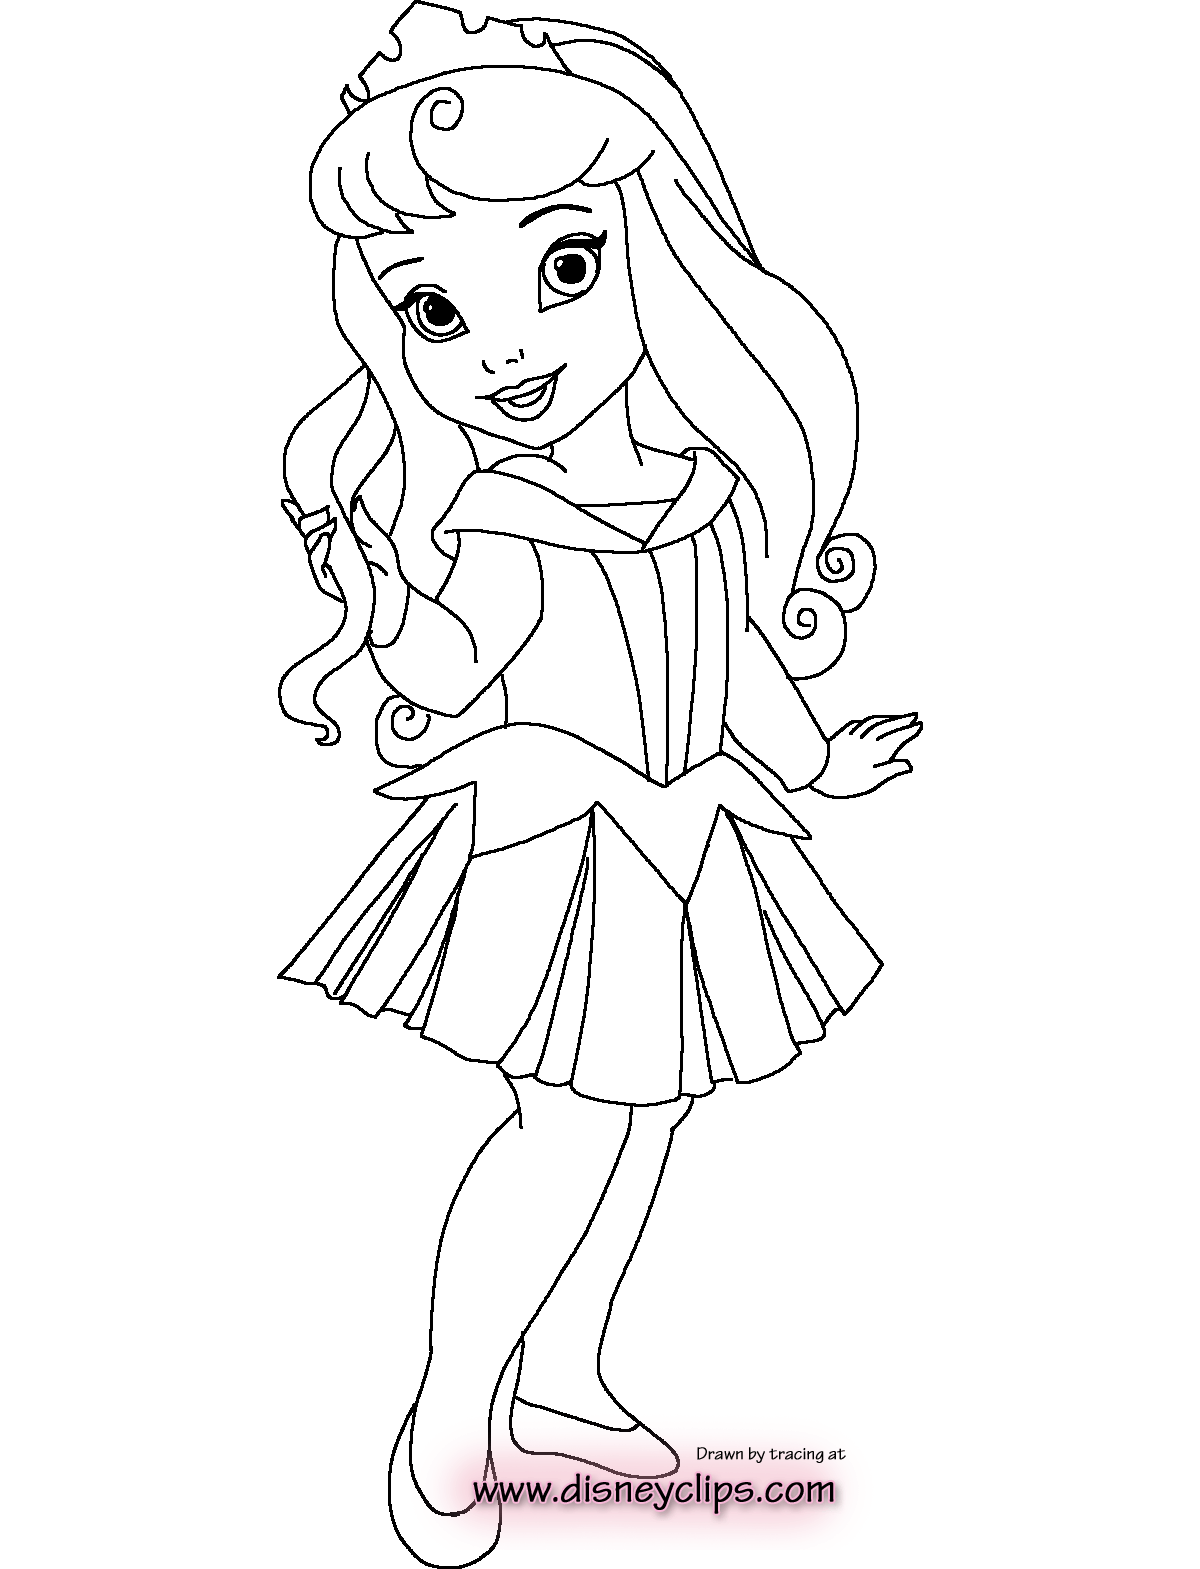 Cool Little Princess 1 Coloring Page